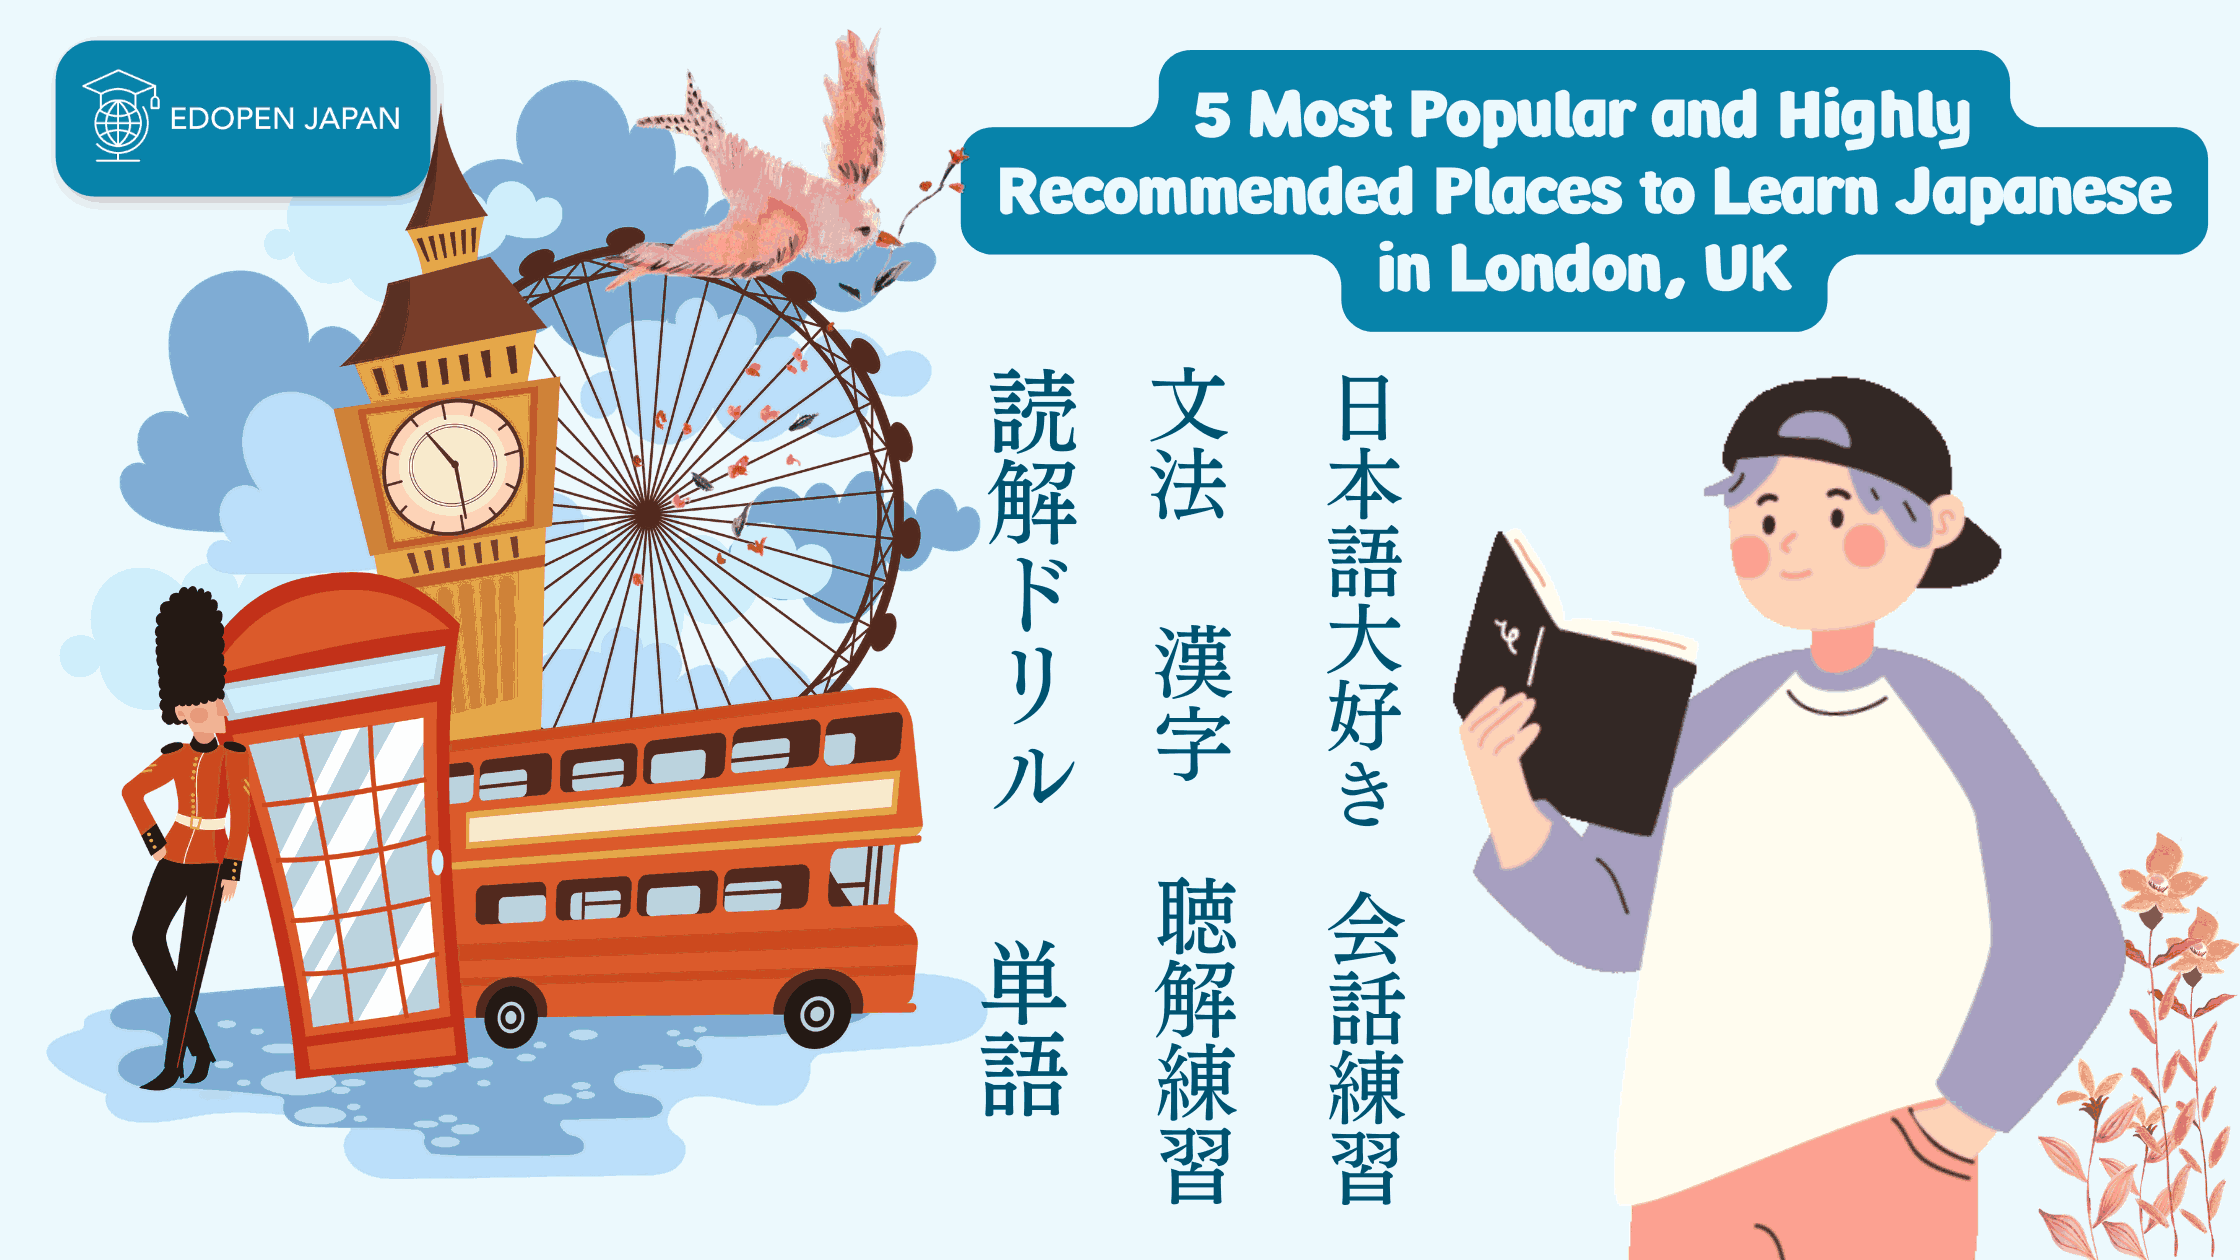 5 Most Popular and Highly Recommended Places to Learn Japanese in London, UK